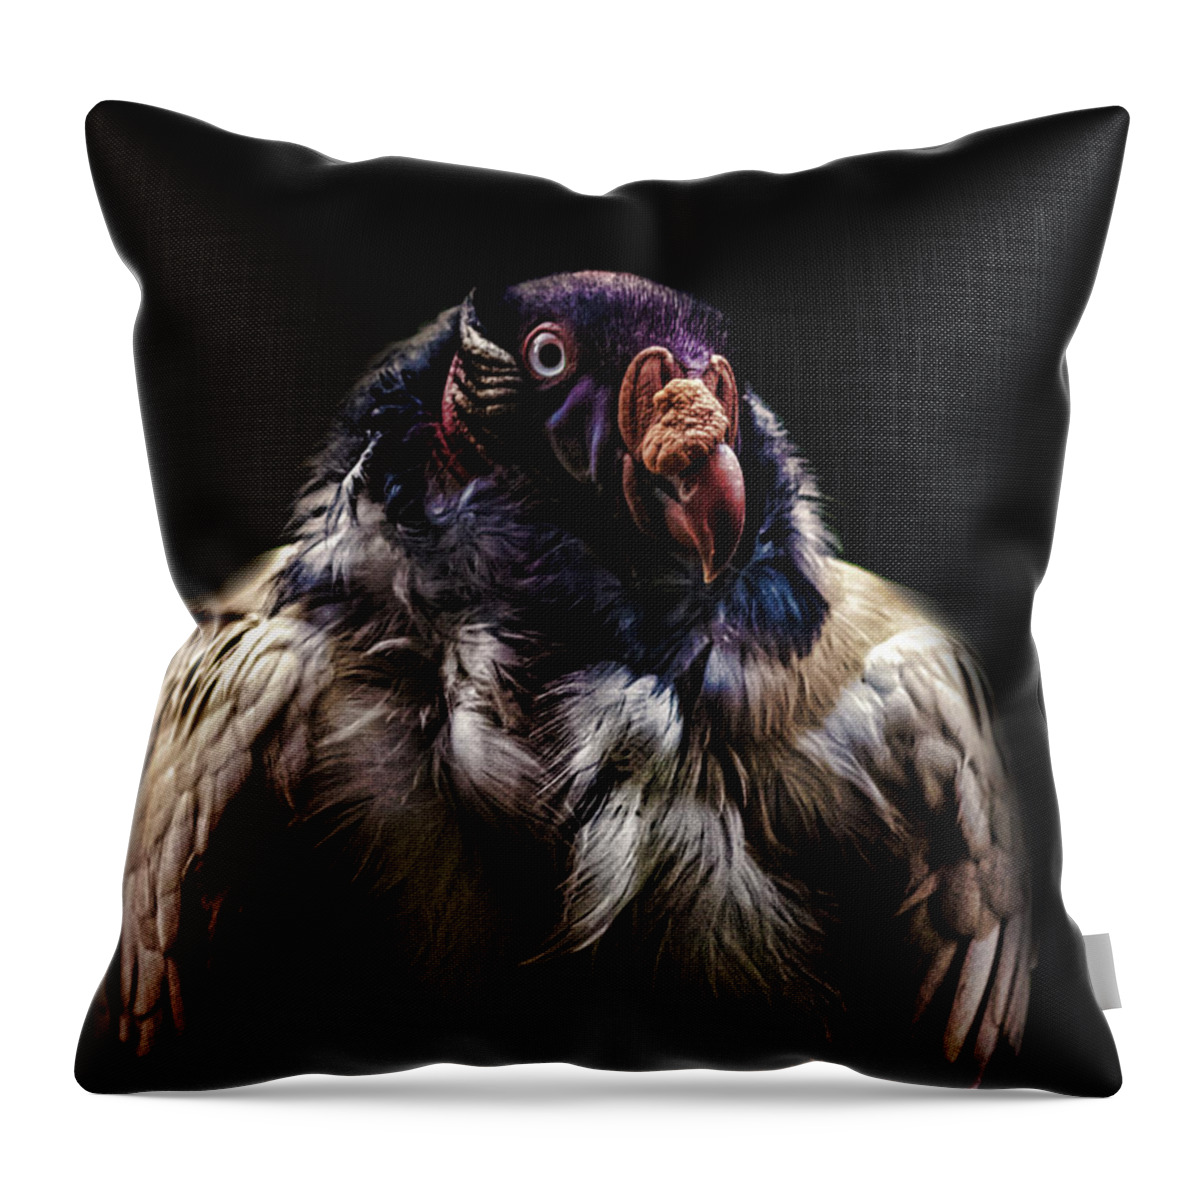 Vulture Throw Pillow featuring the photograph Bad Birdy by Martin Newman